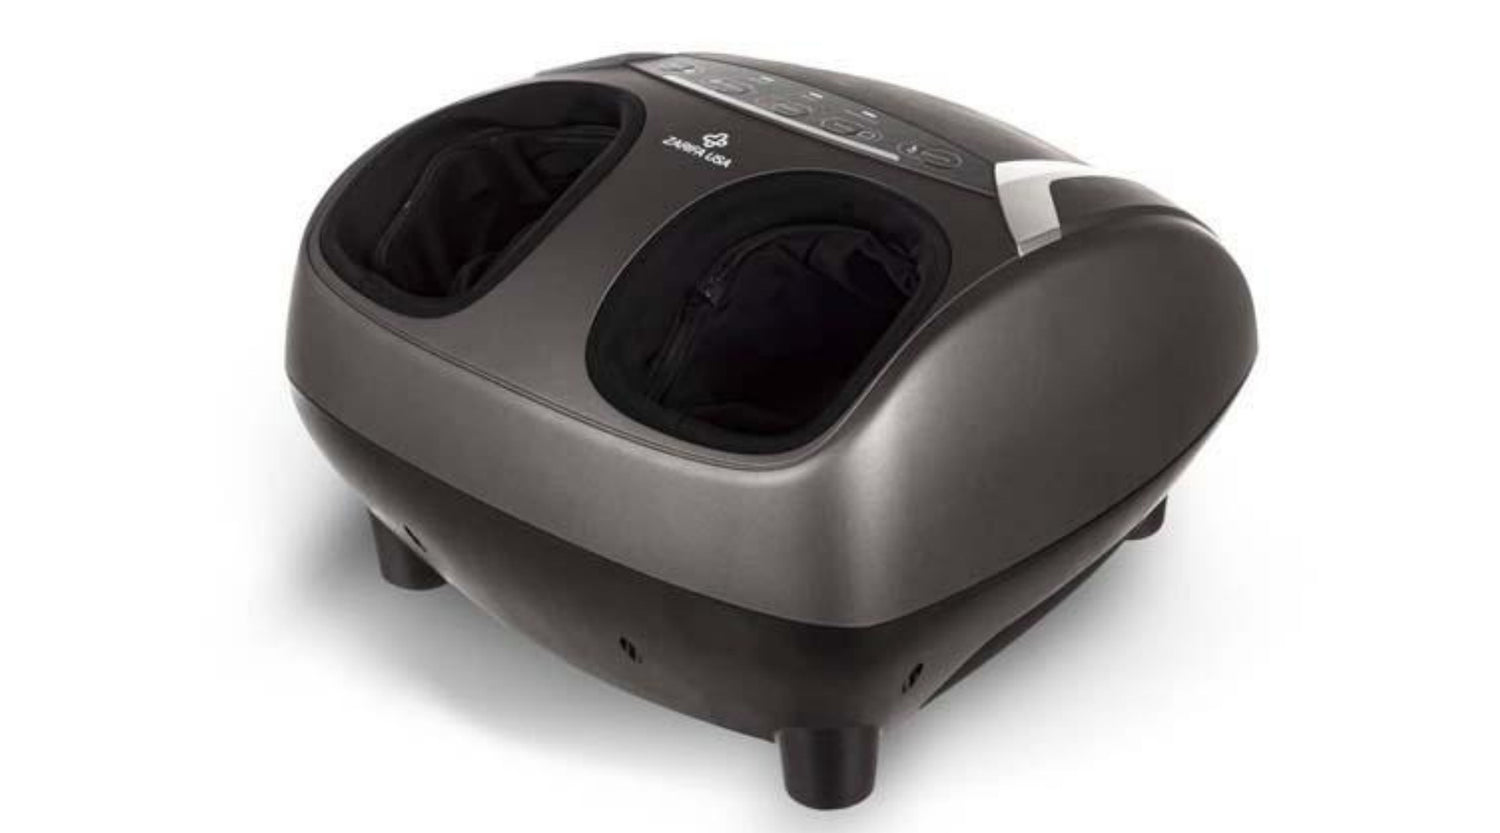 4 Things To Look For When Buying a Foot Massager